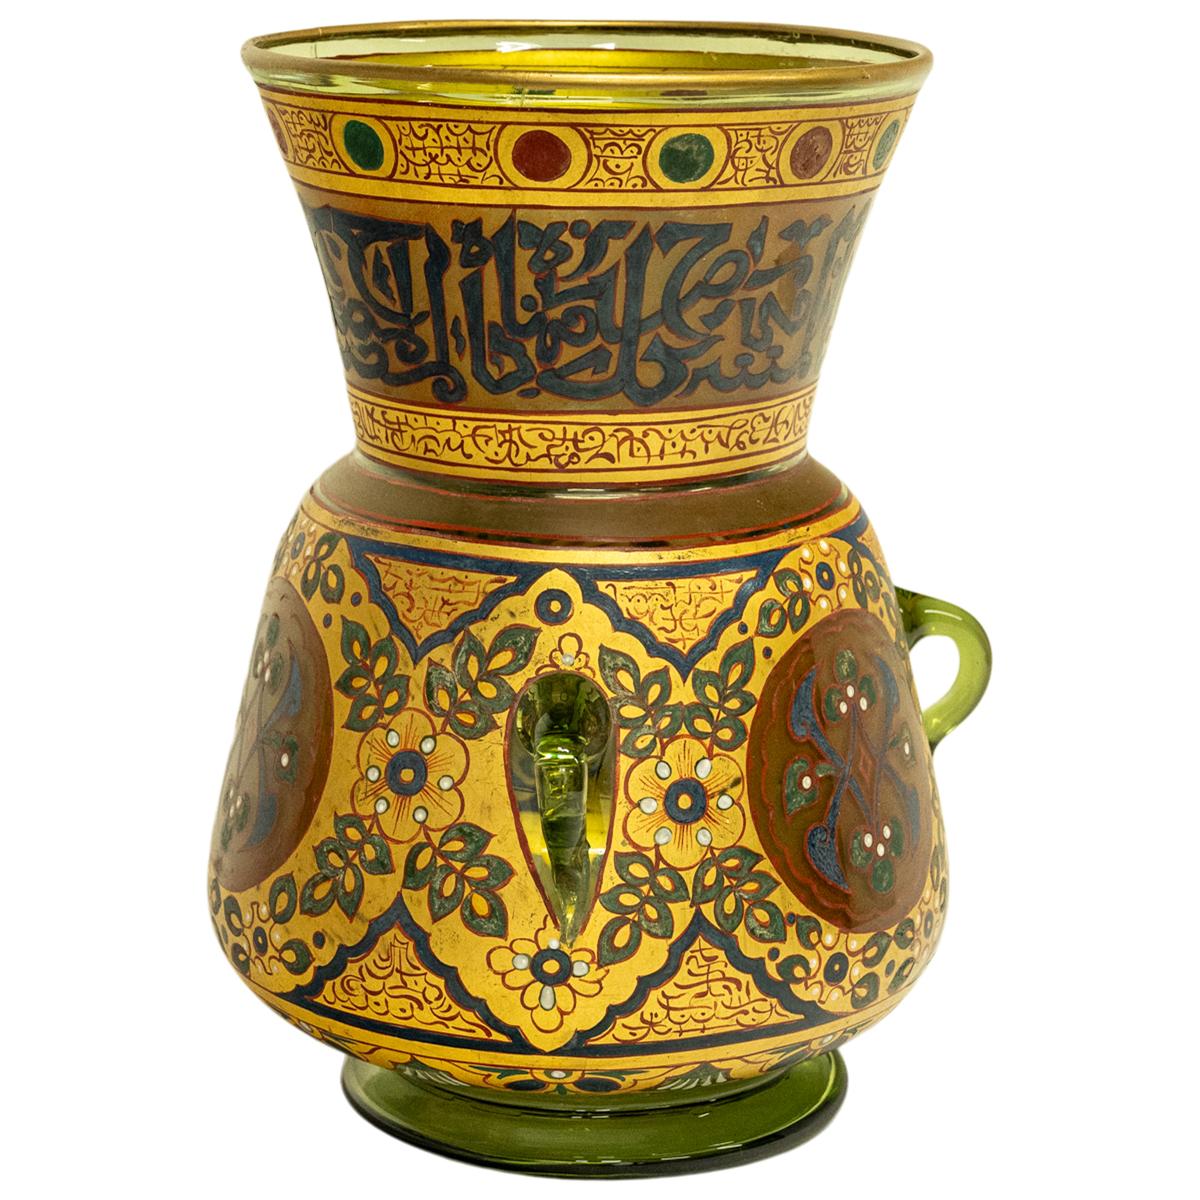 Antique French Islamic Glass Enamel Gilt Mamluk Revival Mosque Lamp Brocard 1880 For Sale 4